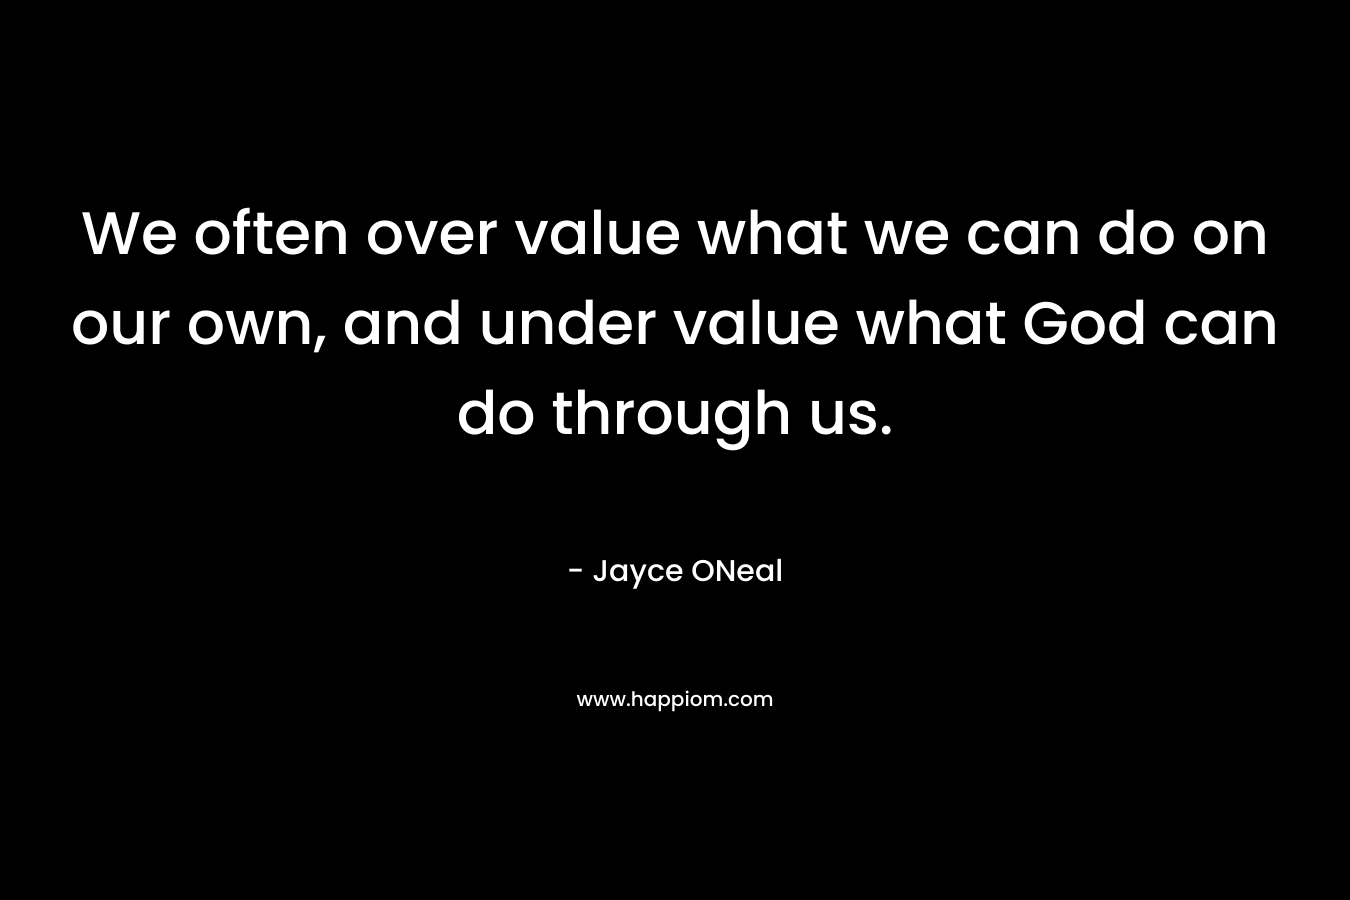 We often over value what we can do on our own, and under value what God can do through us.